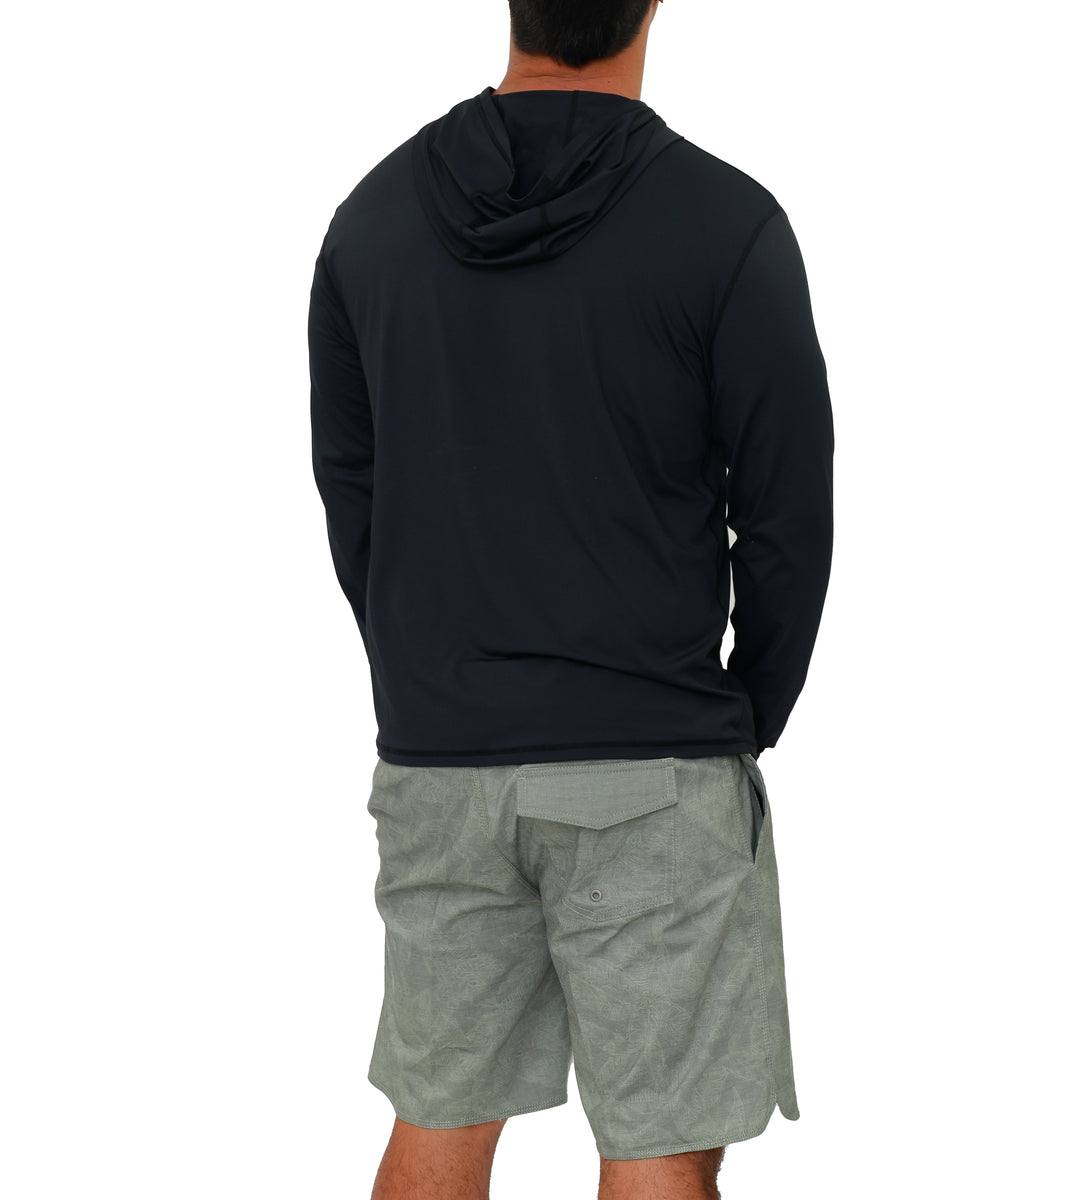 CAN. Performance Hoodie Grey and Charcoal – Spirit of CAN.